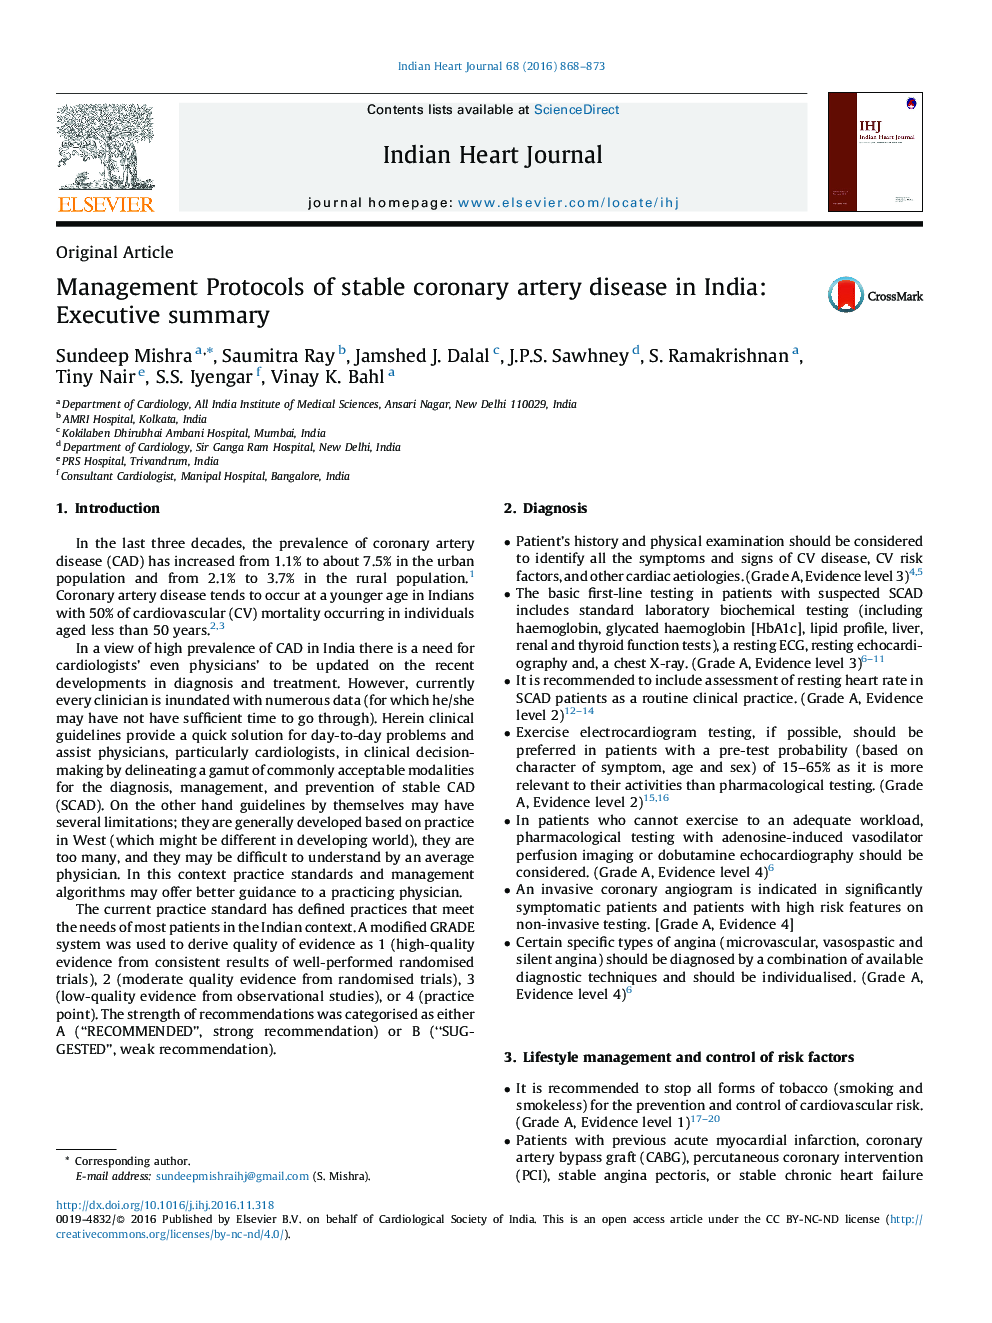 Management Protocols of stable coronary artery disease in India: Executive summary